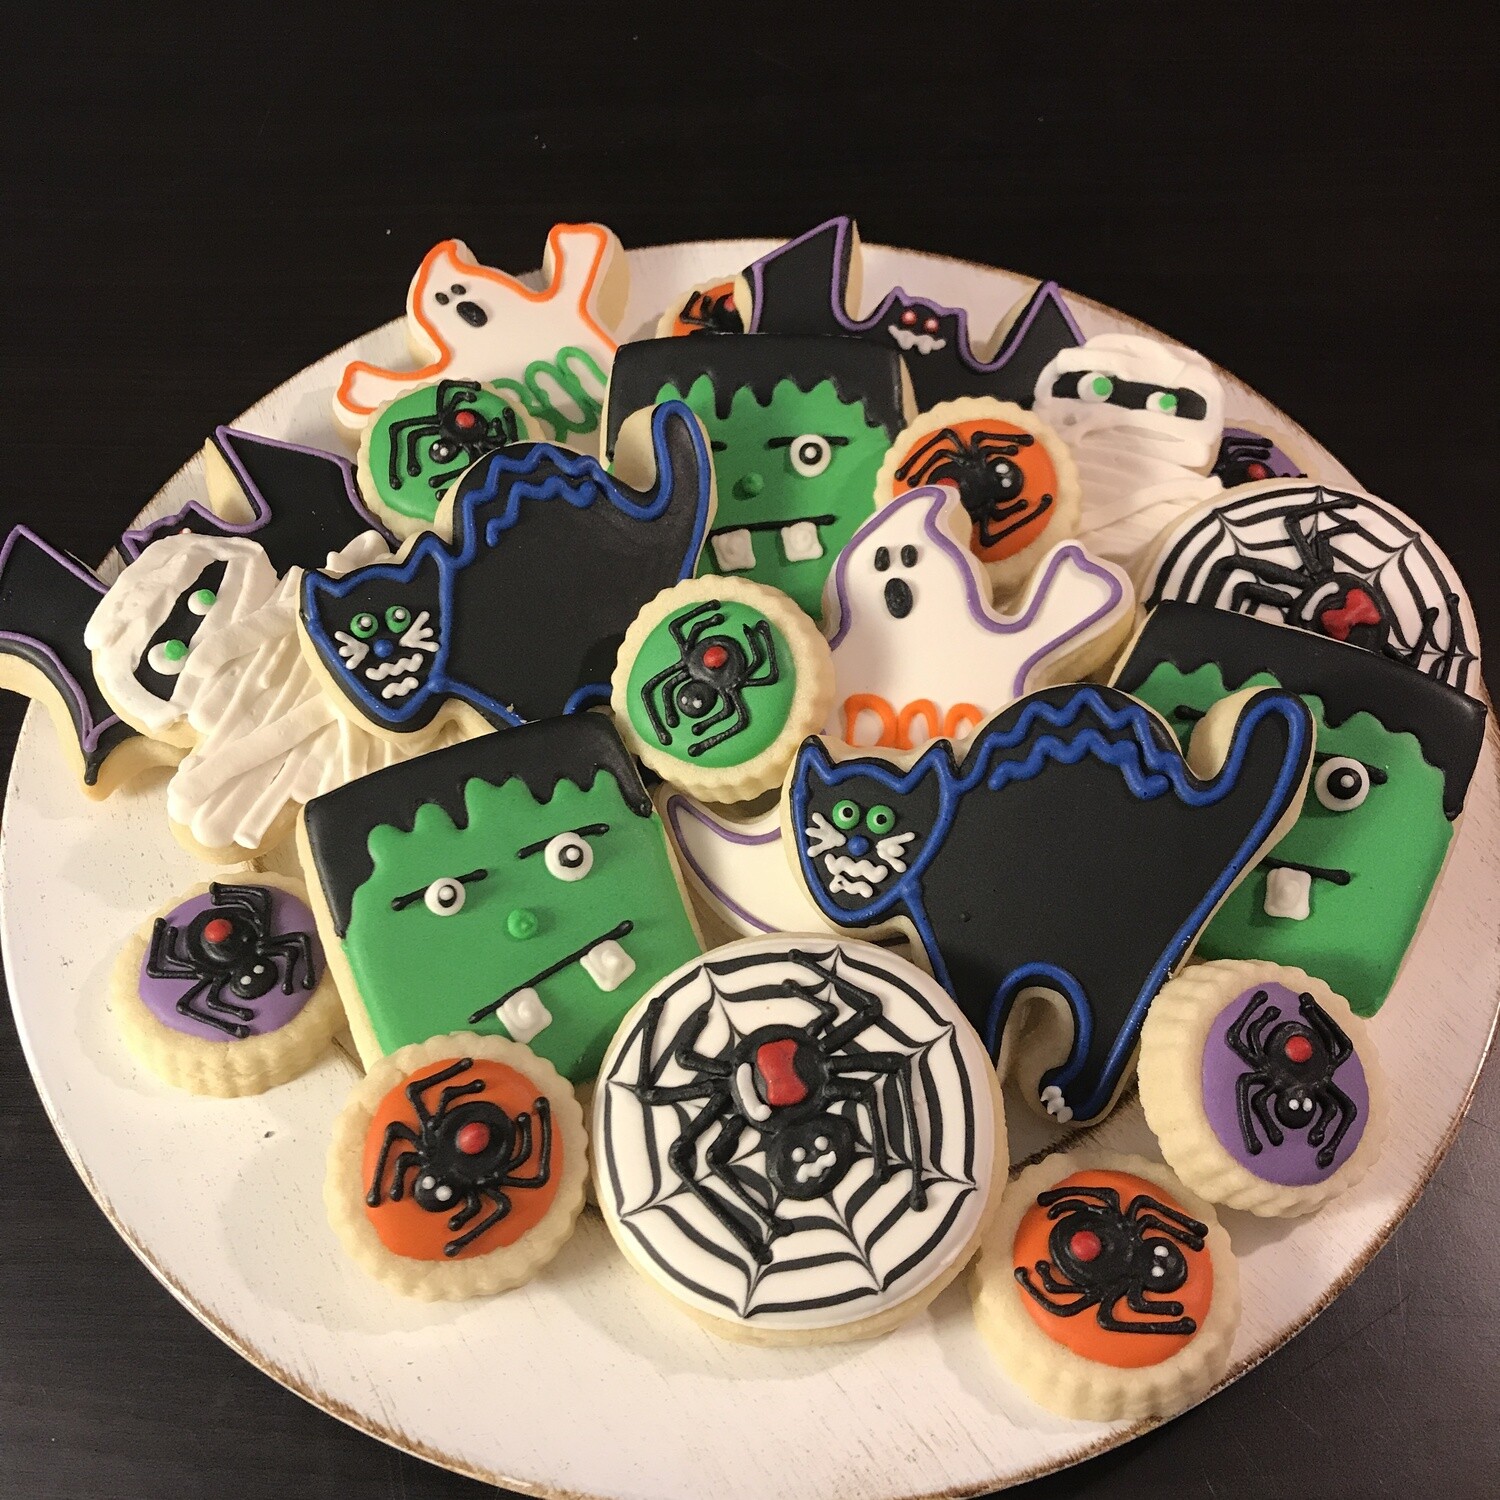 HALLOWEEN Decorating Workshop (BYOB) - SUNDAY, OCTOBER 20, 2019 at 6:00 p.m. (THE VENUES ON SYCAMORE)